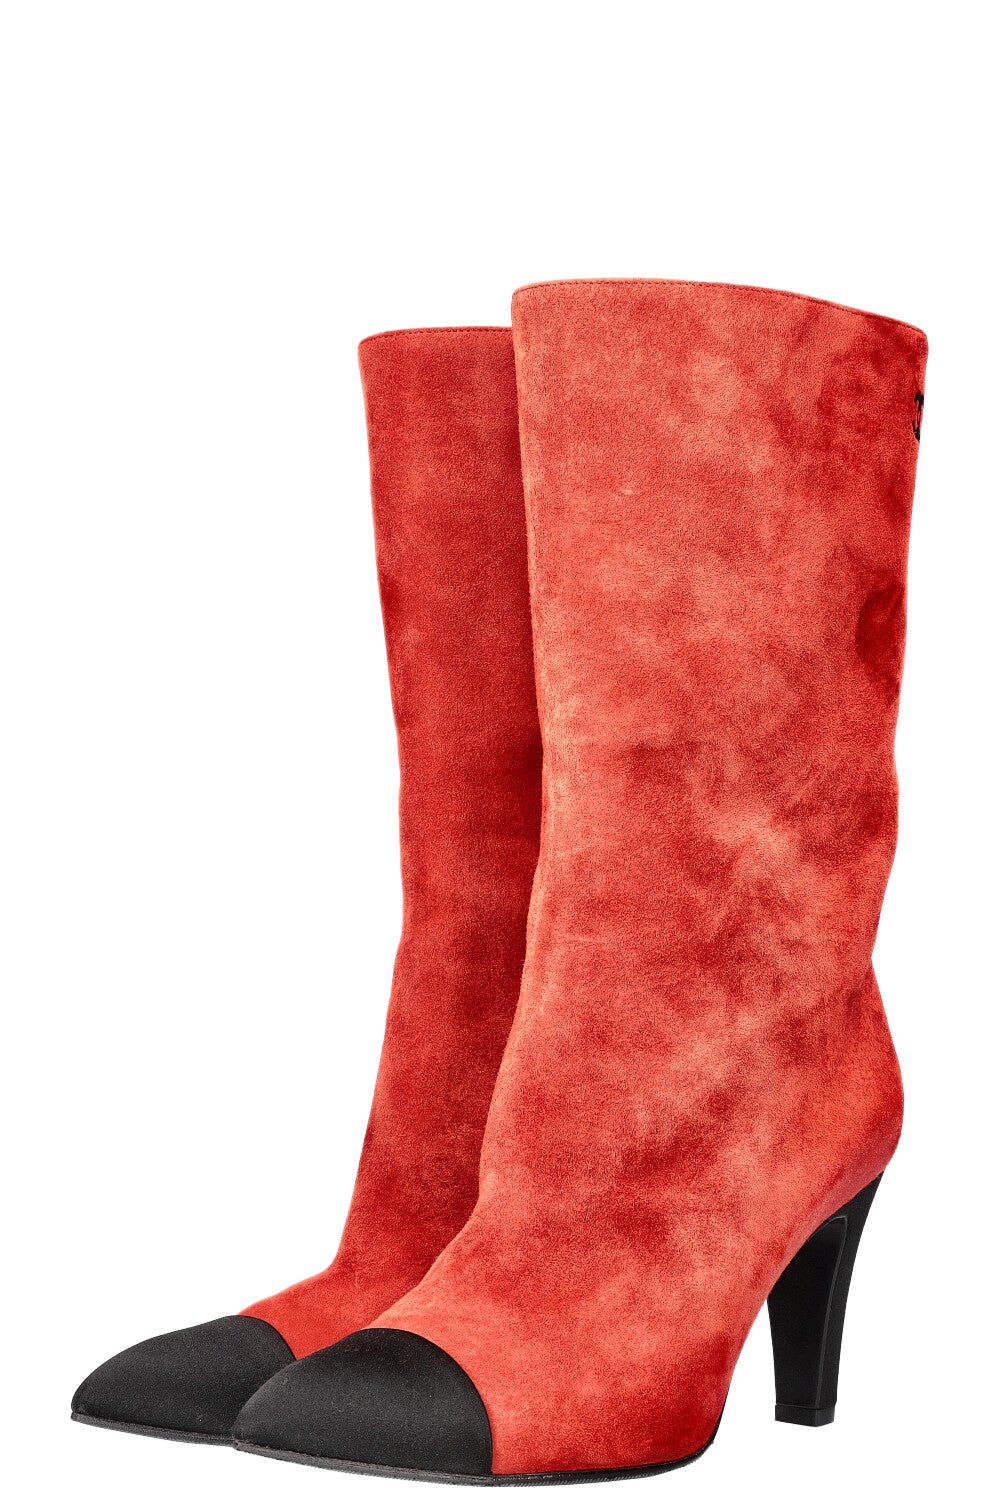 CHANEL Gabrielle Ankle Boots Suede Red